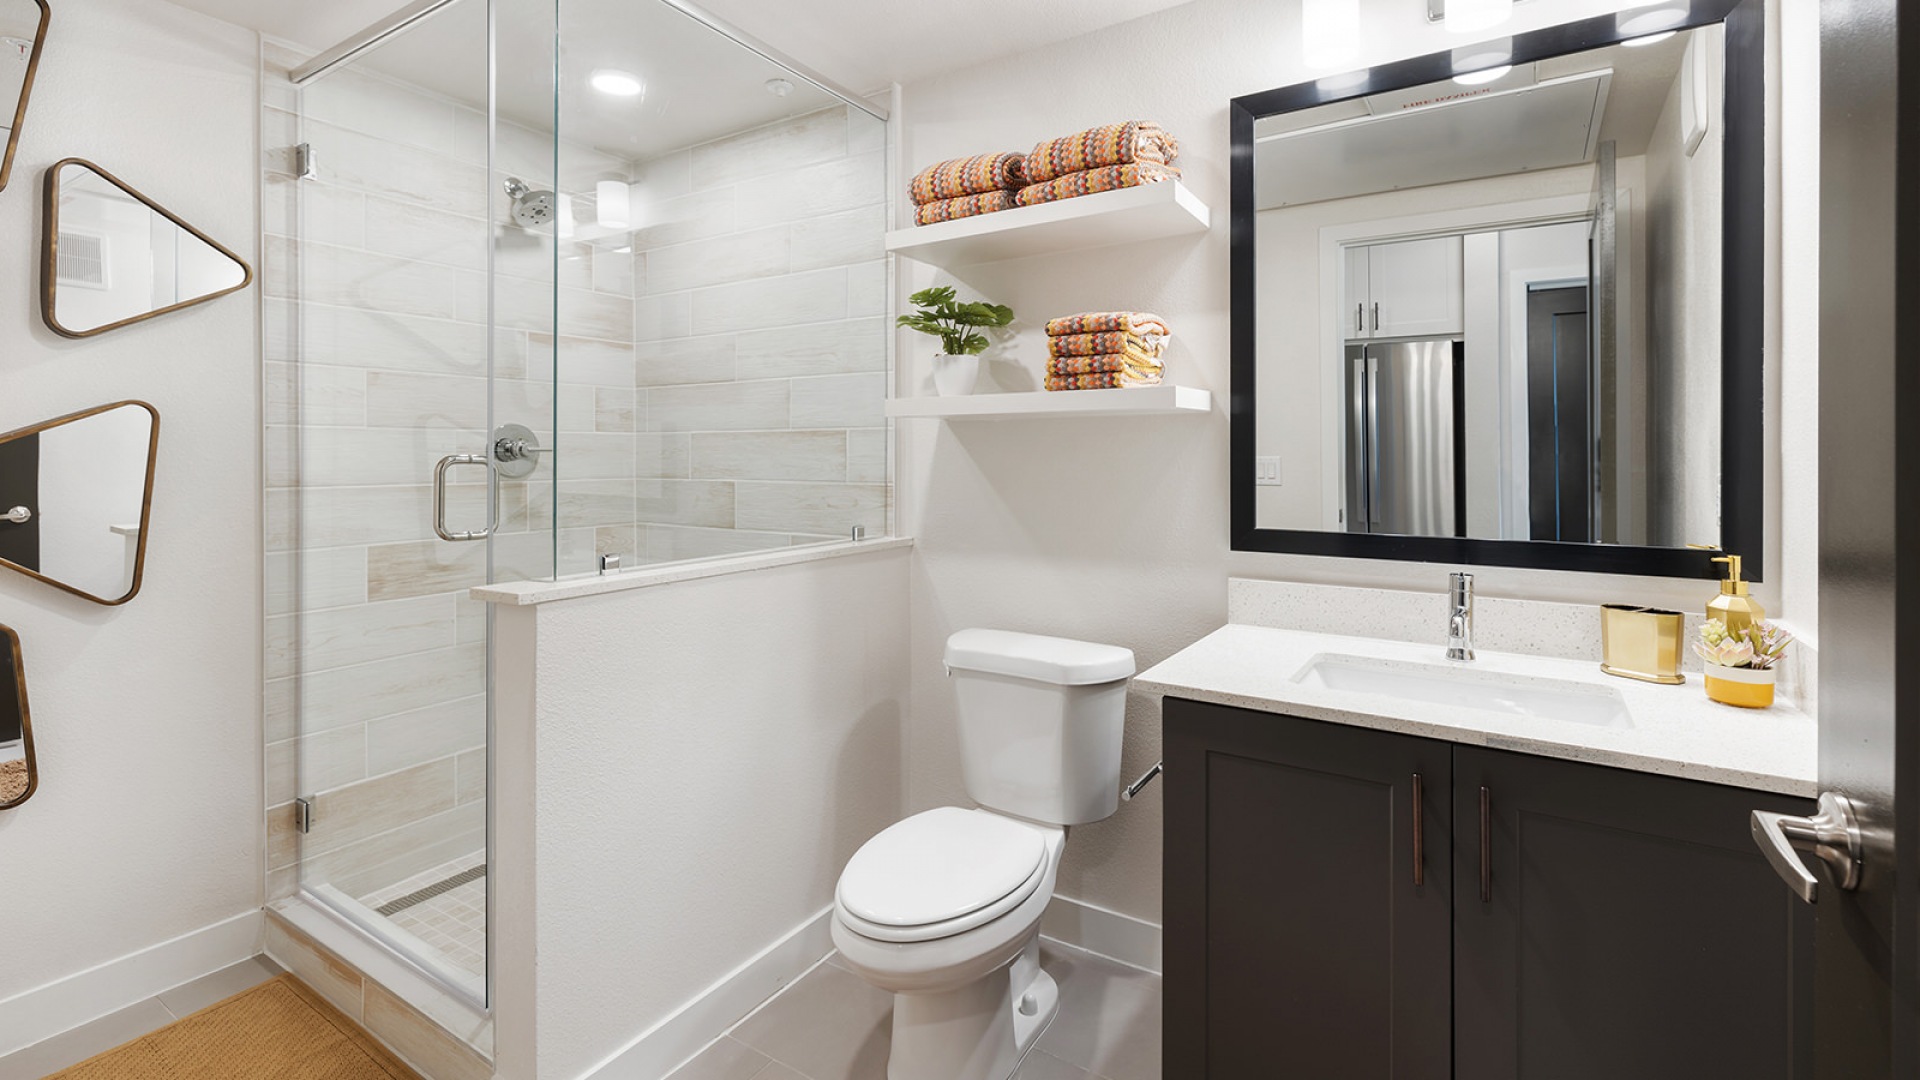 Model bathroom at our apartments in Houston, TX, featuring tiled flooring and a shower with a glass door.